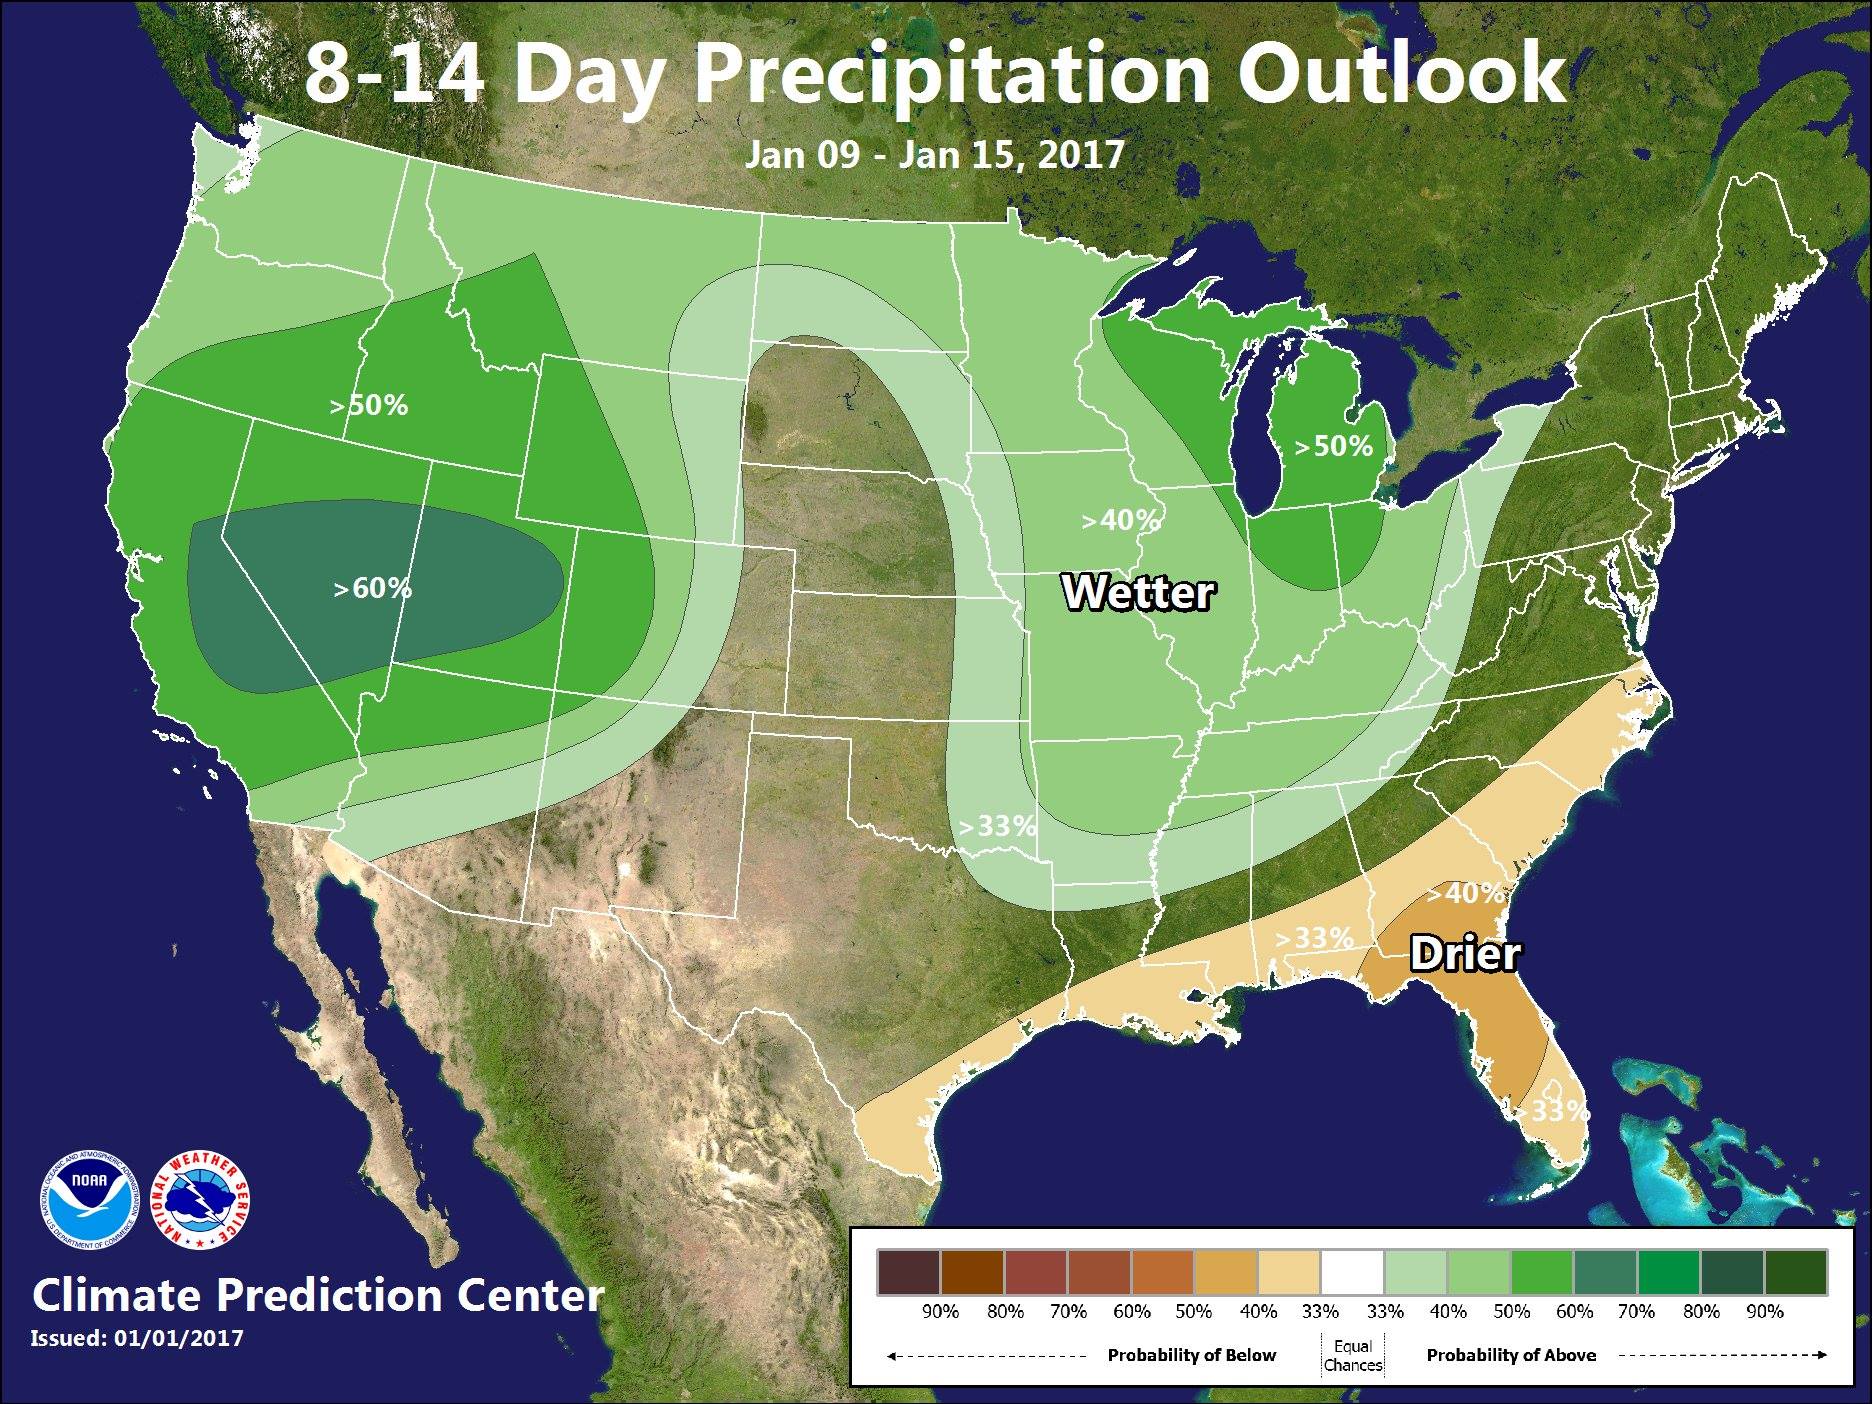 8-14 day outlook looking wet for CA.  image:  noaa, yesterday